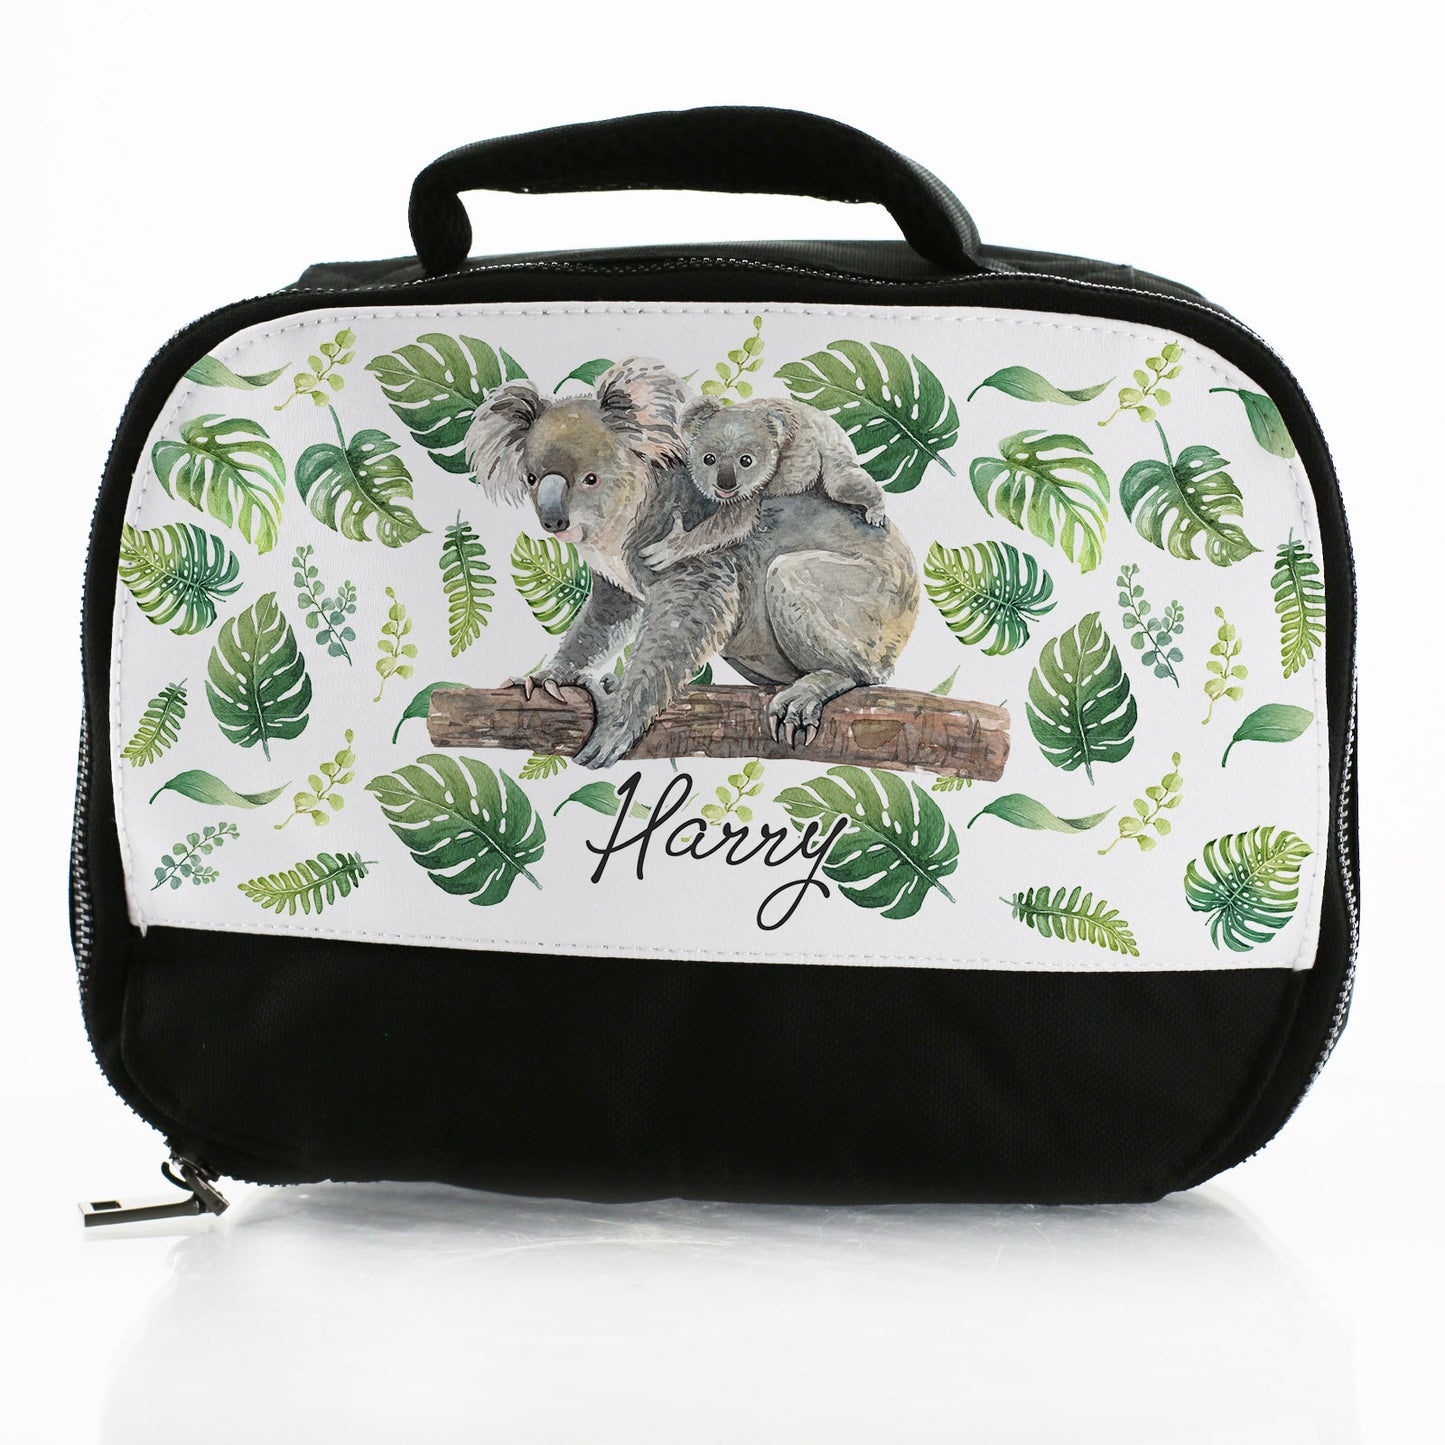 Personalised Lunch Bag with Cute Koala & Name